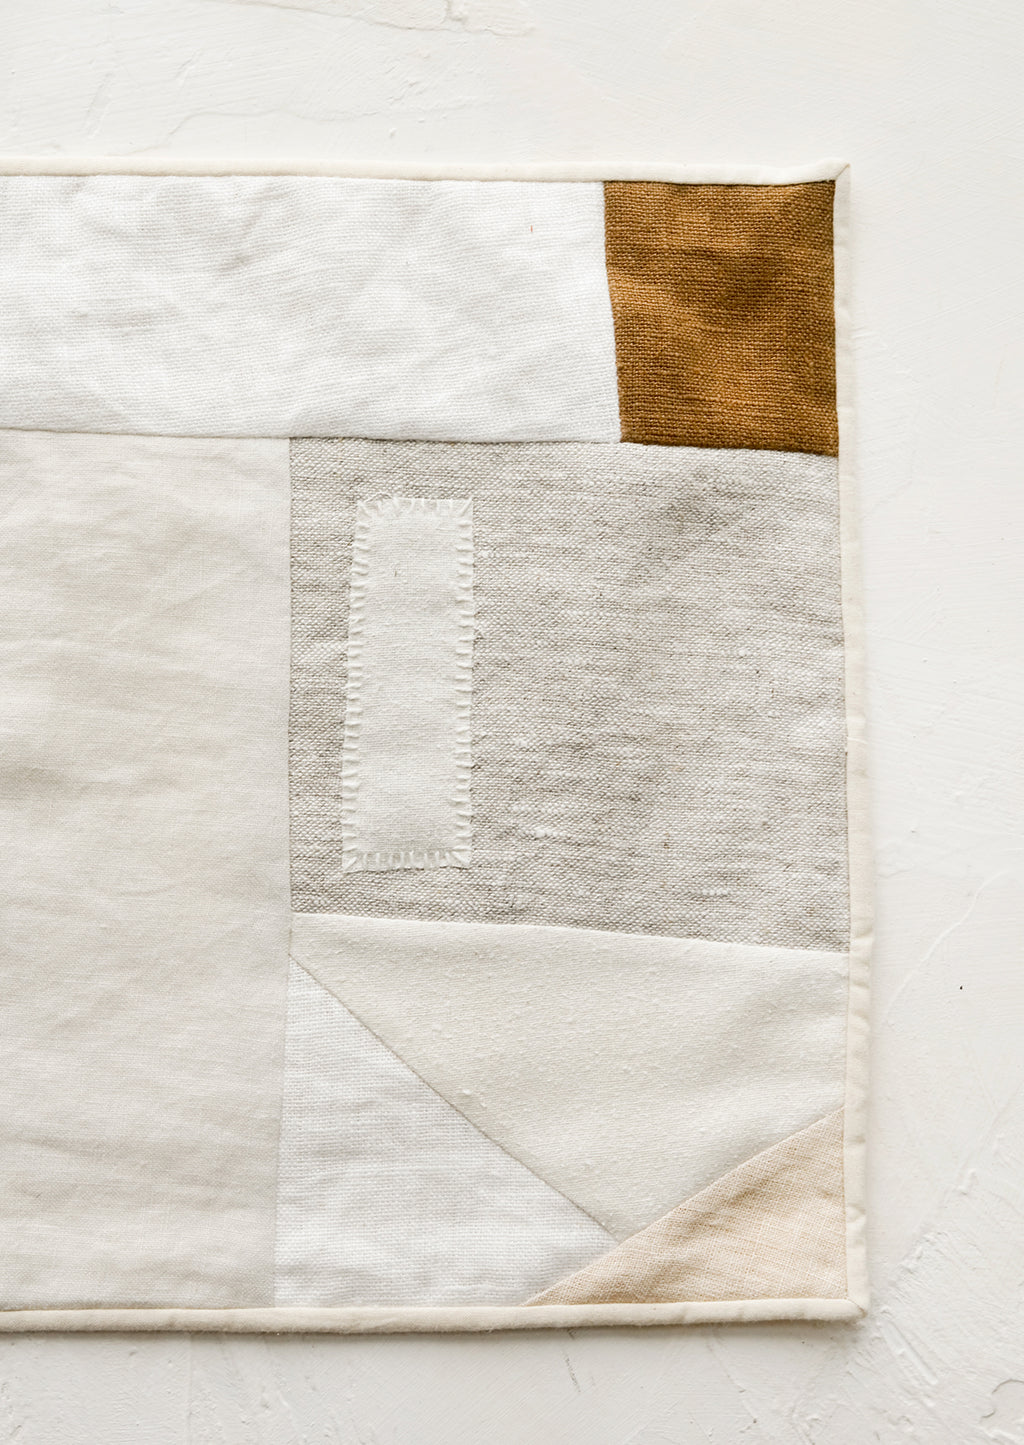 3: A rectangular placemat with patchwork design in natural shades.